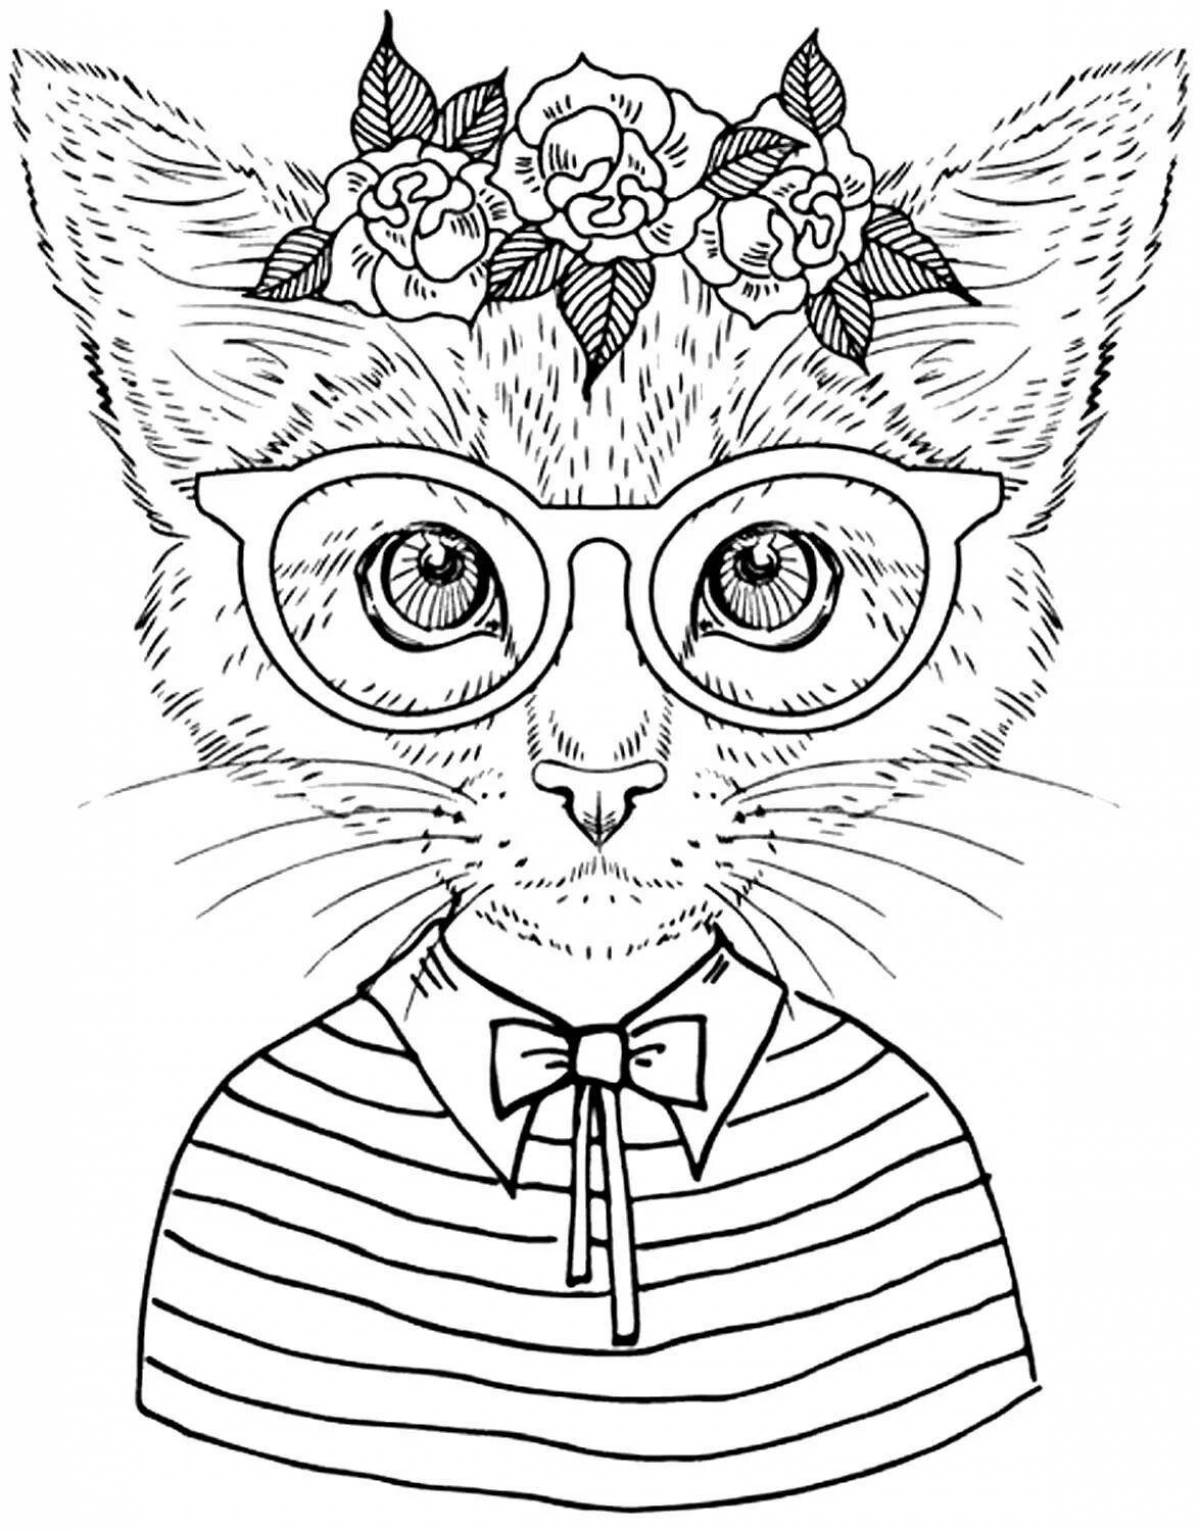 Charming cat coloring page